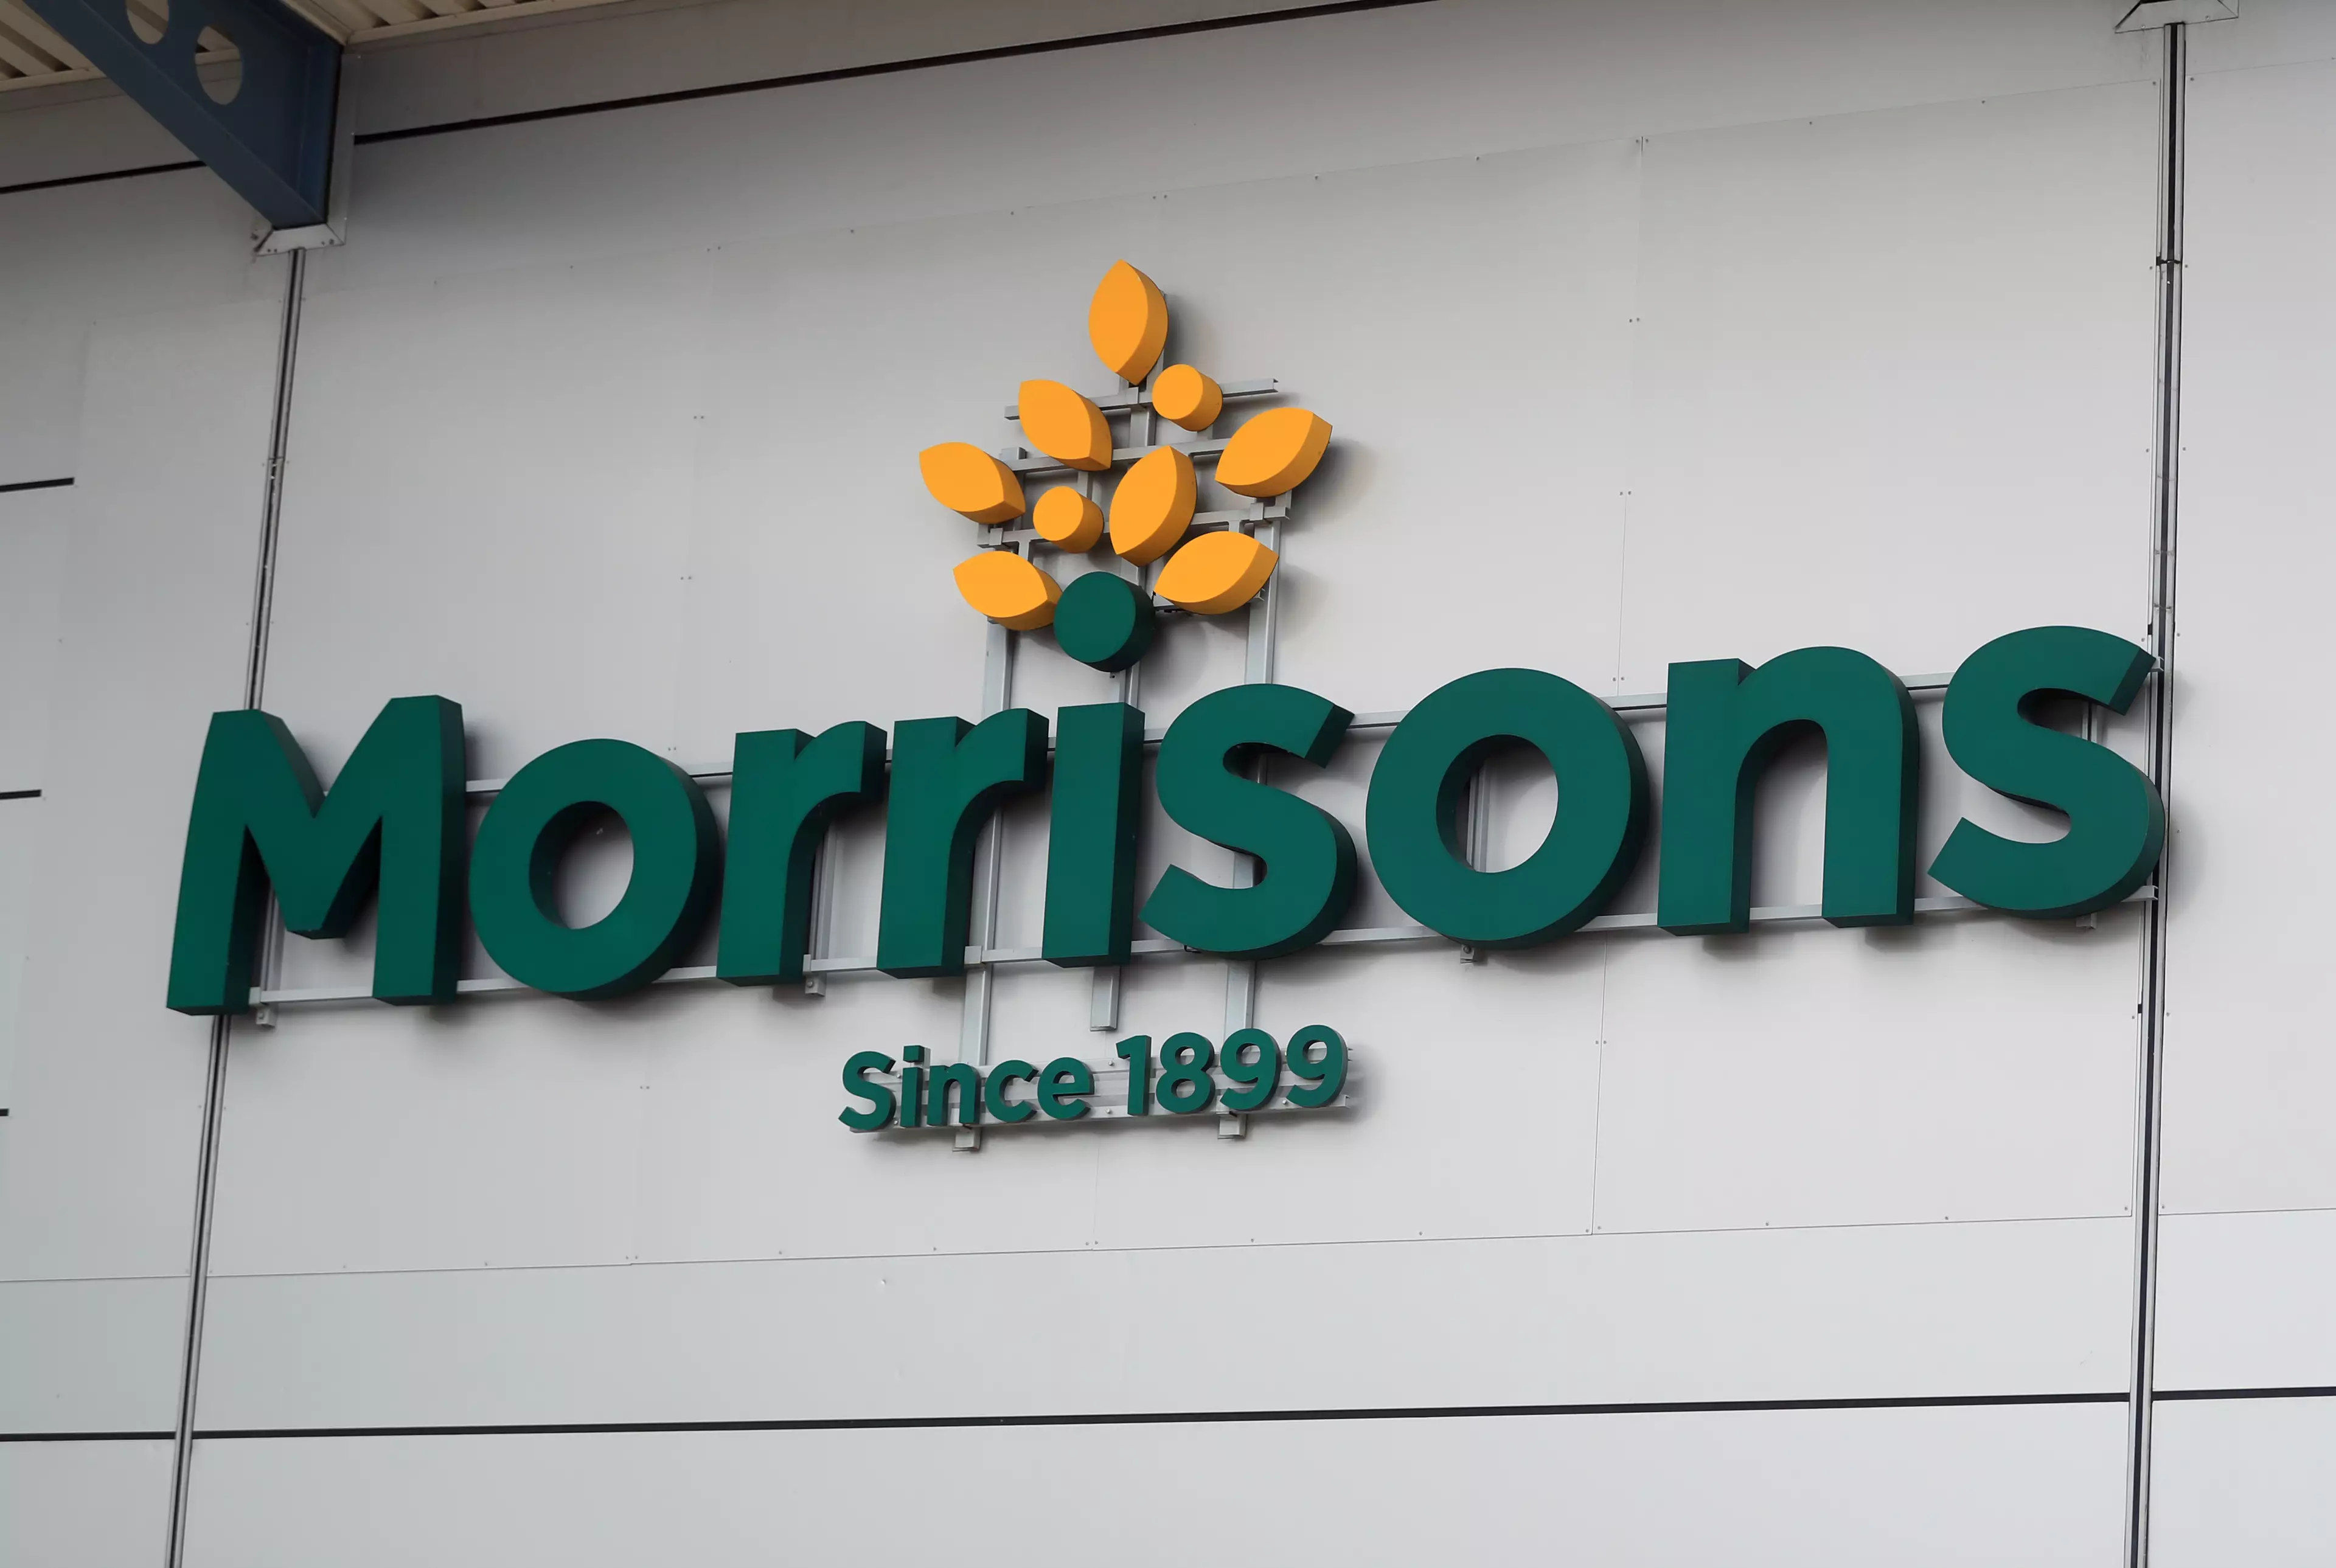 Morrisons recently announced that it was offering a 10 percent discount.